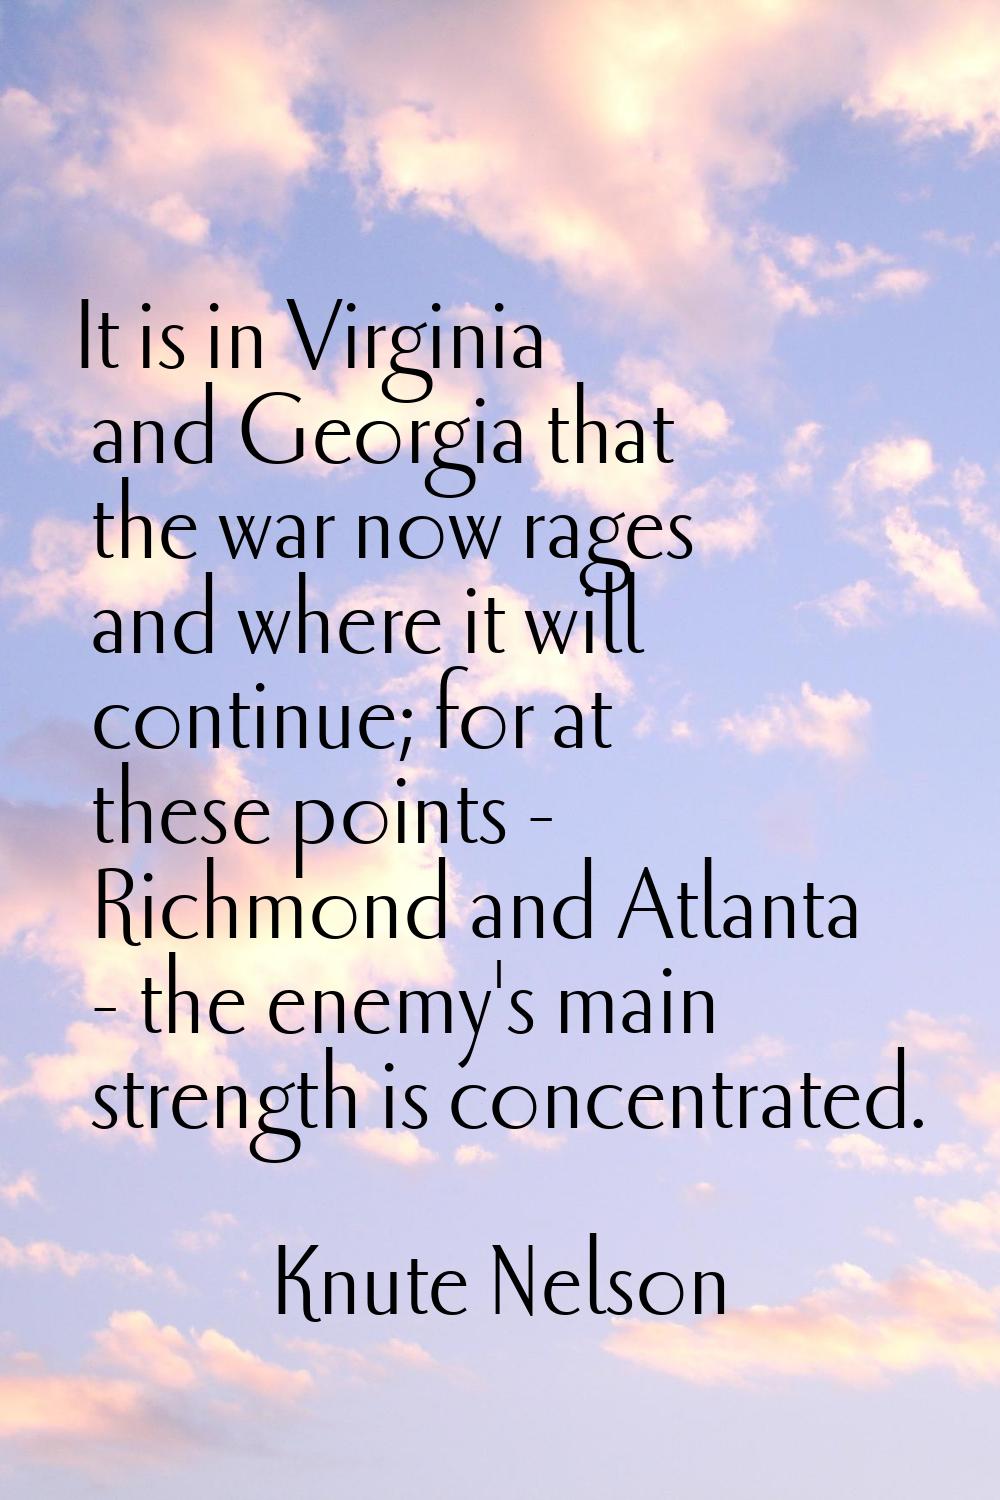 It is in Virginia and Georgia that the war now rages and where it will continue; for at these point